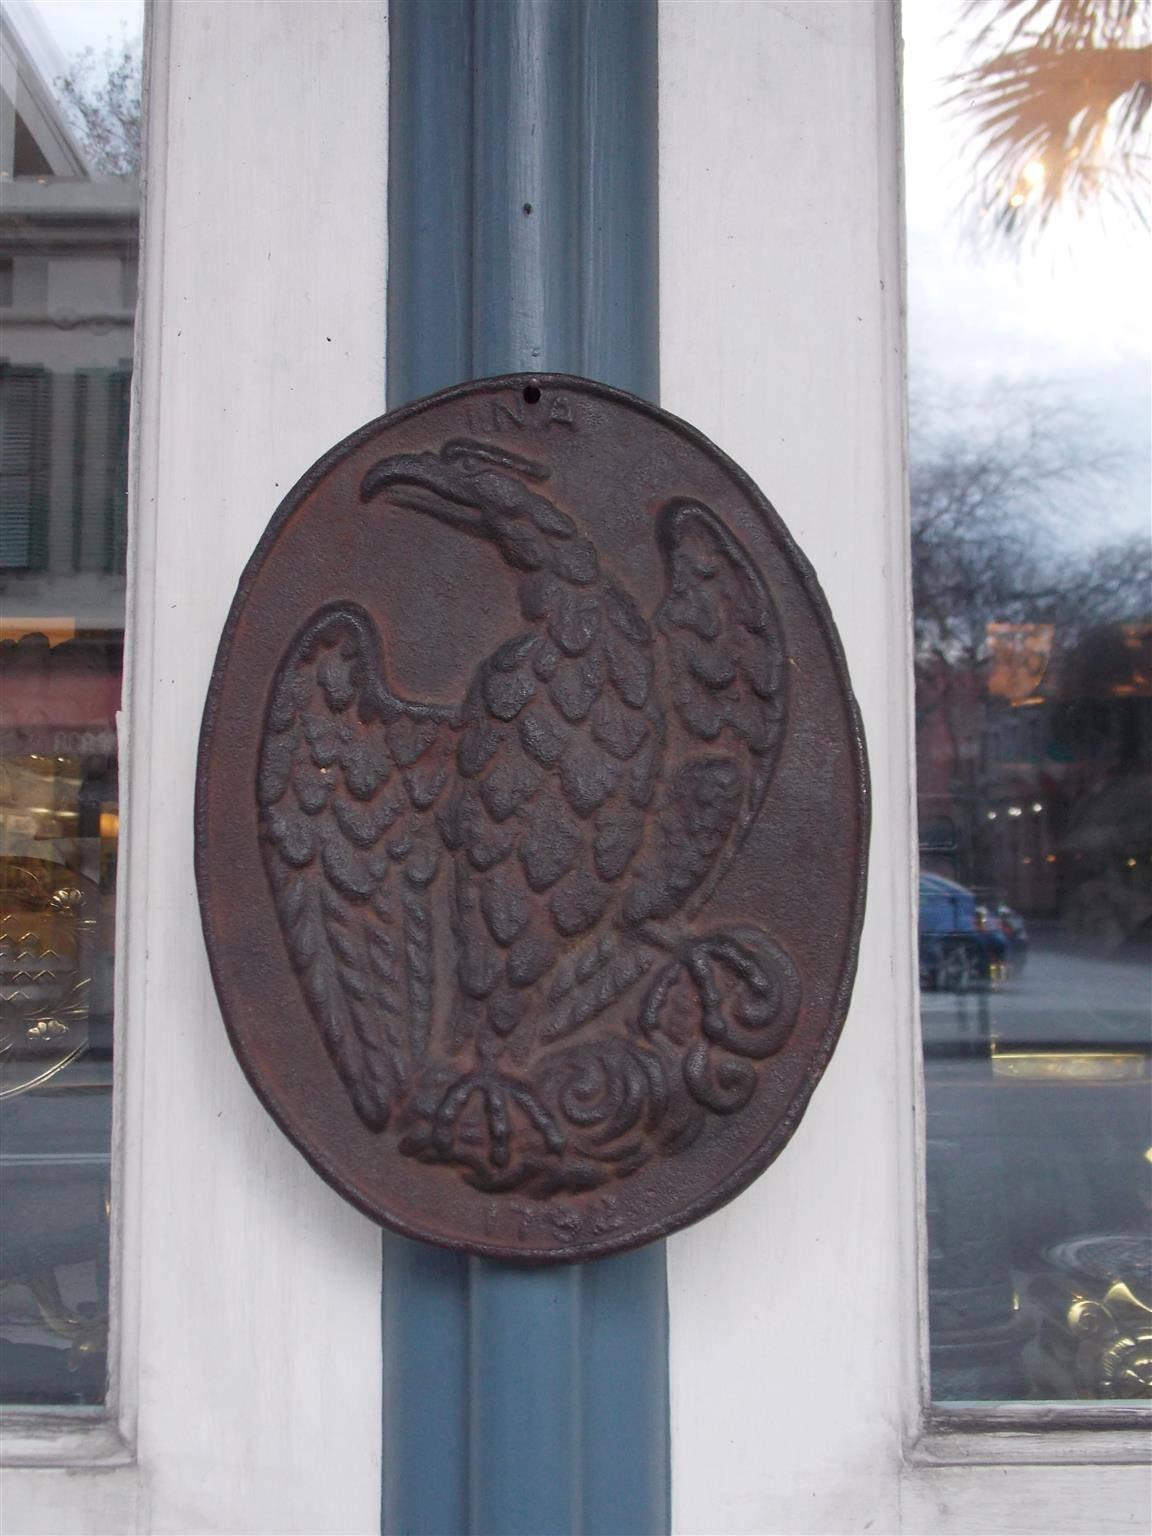 American oval cast iron INA perched eagle fire mark Stamped , 1792. On November 19, 1792 John Nesbitt and Ebenezer Hazard met in Philadelphia's Independence Hall to create the Insurance Company of America.  INA wrote the first policy to cover ships,